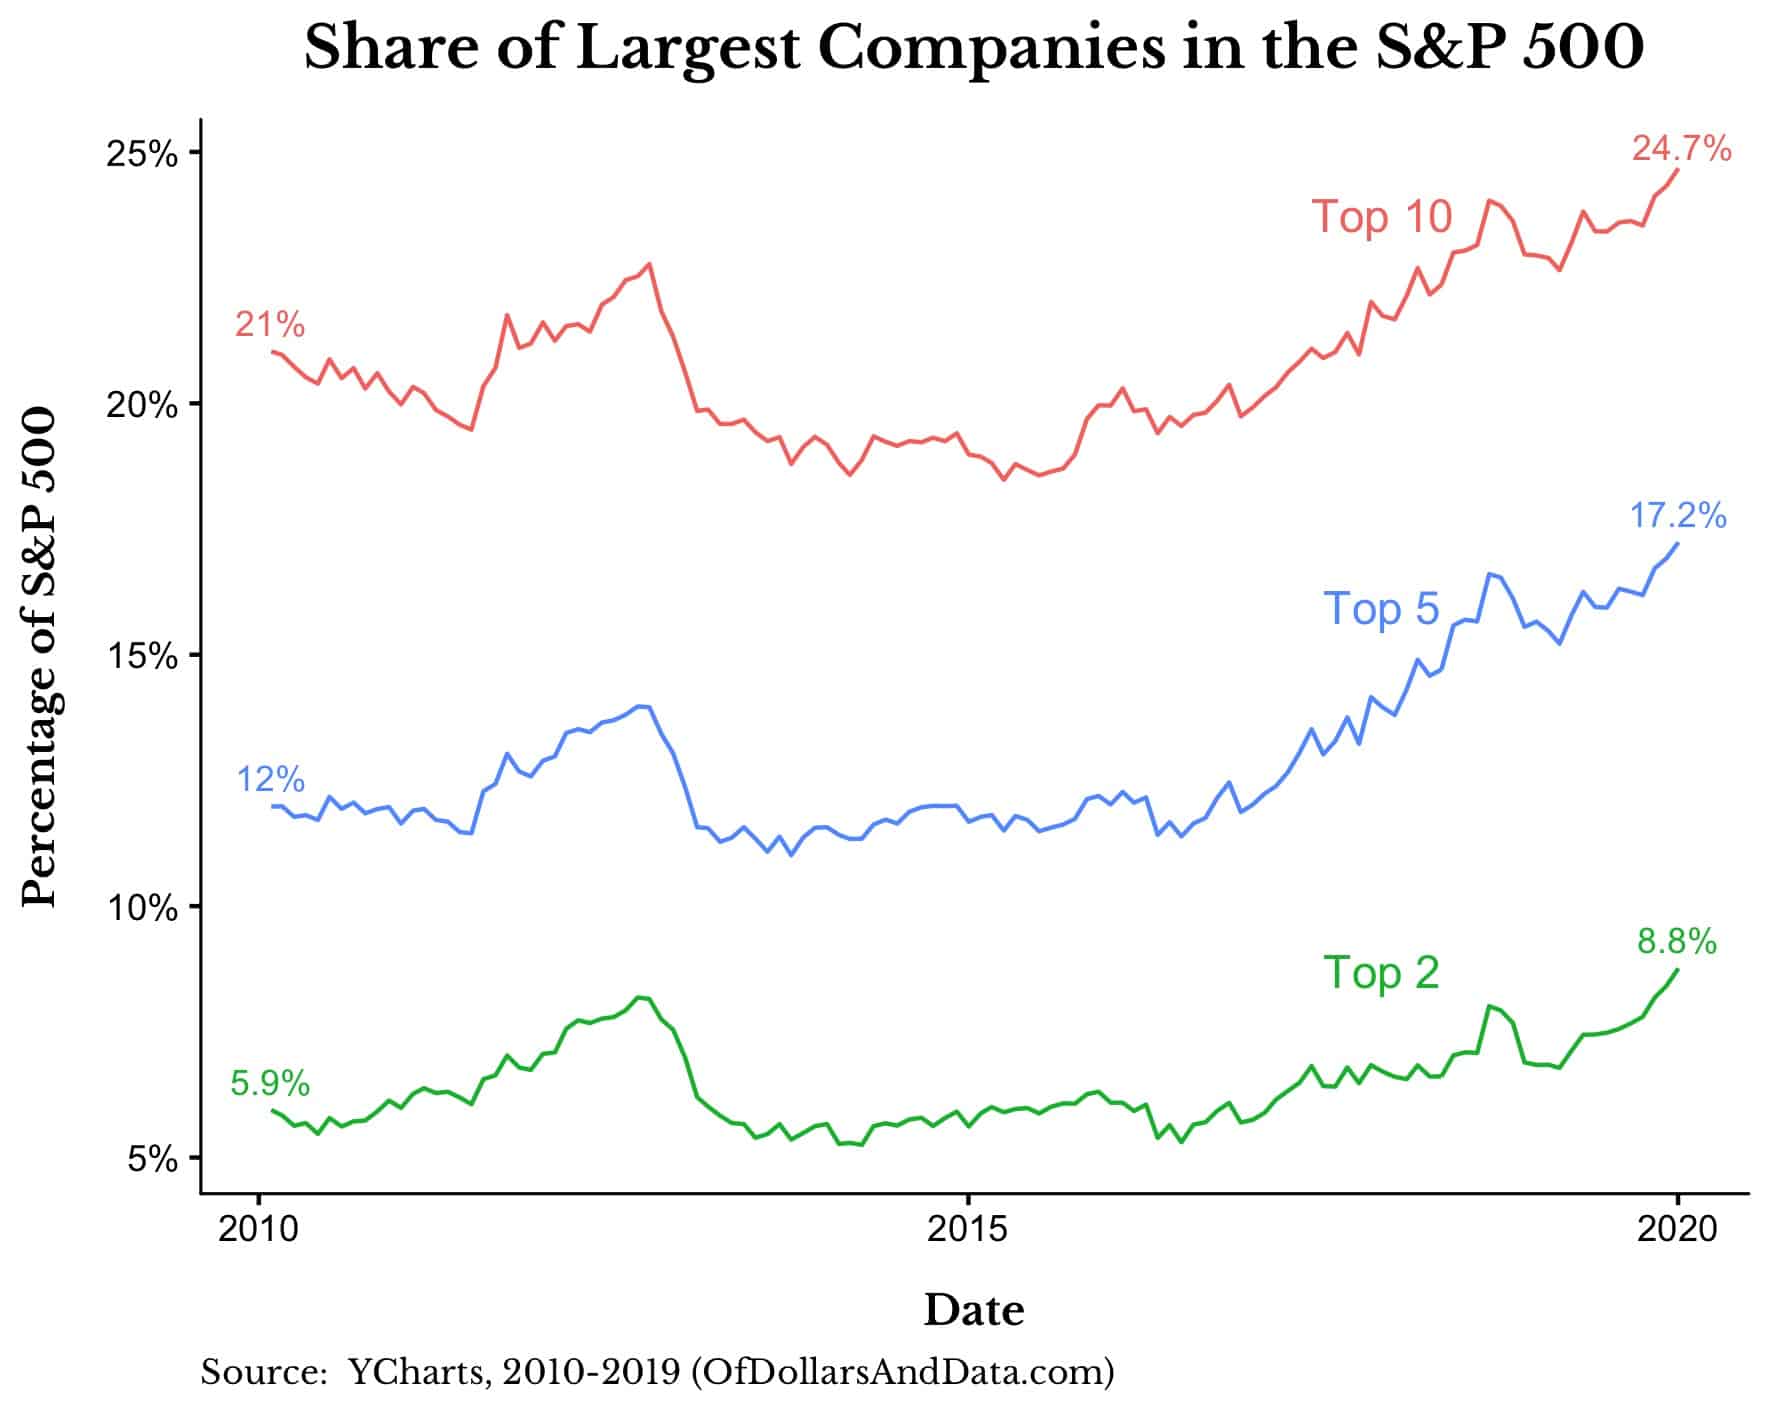 Share of largest companies in the S&P 500 by top 10, top 5, and top 2